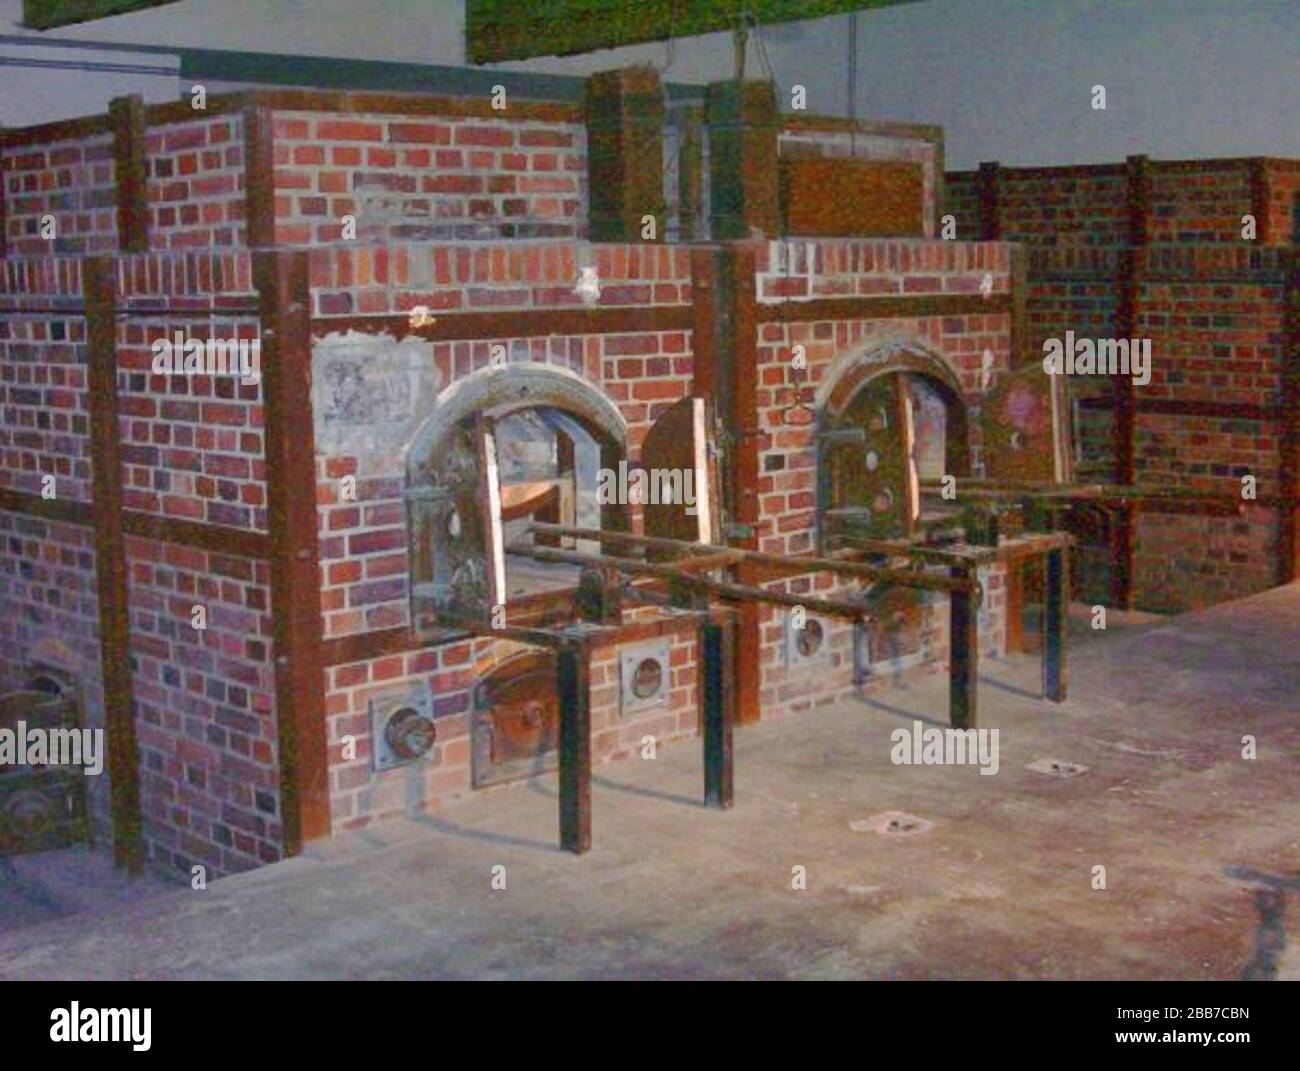 English: A cremation oven at the Dachau concentration camp. Well over  30,000 persons died in this camp, where the ovens were used to dispose of  the bodies.; 1 January 2011, 04:31 (UTC);